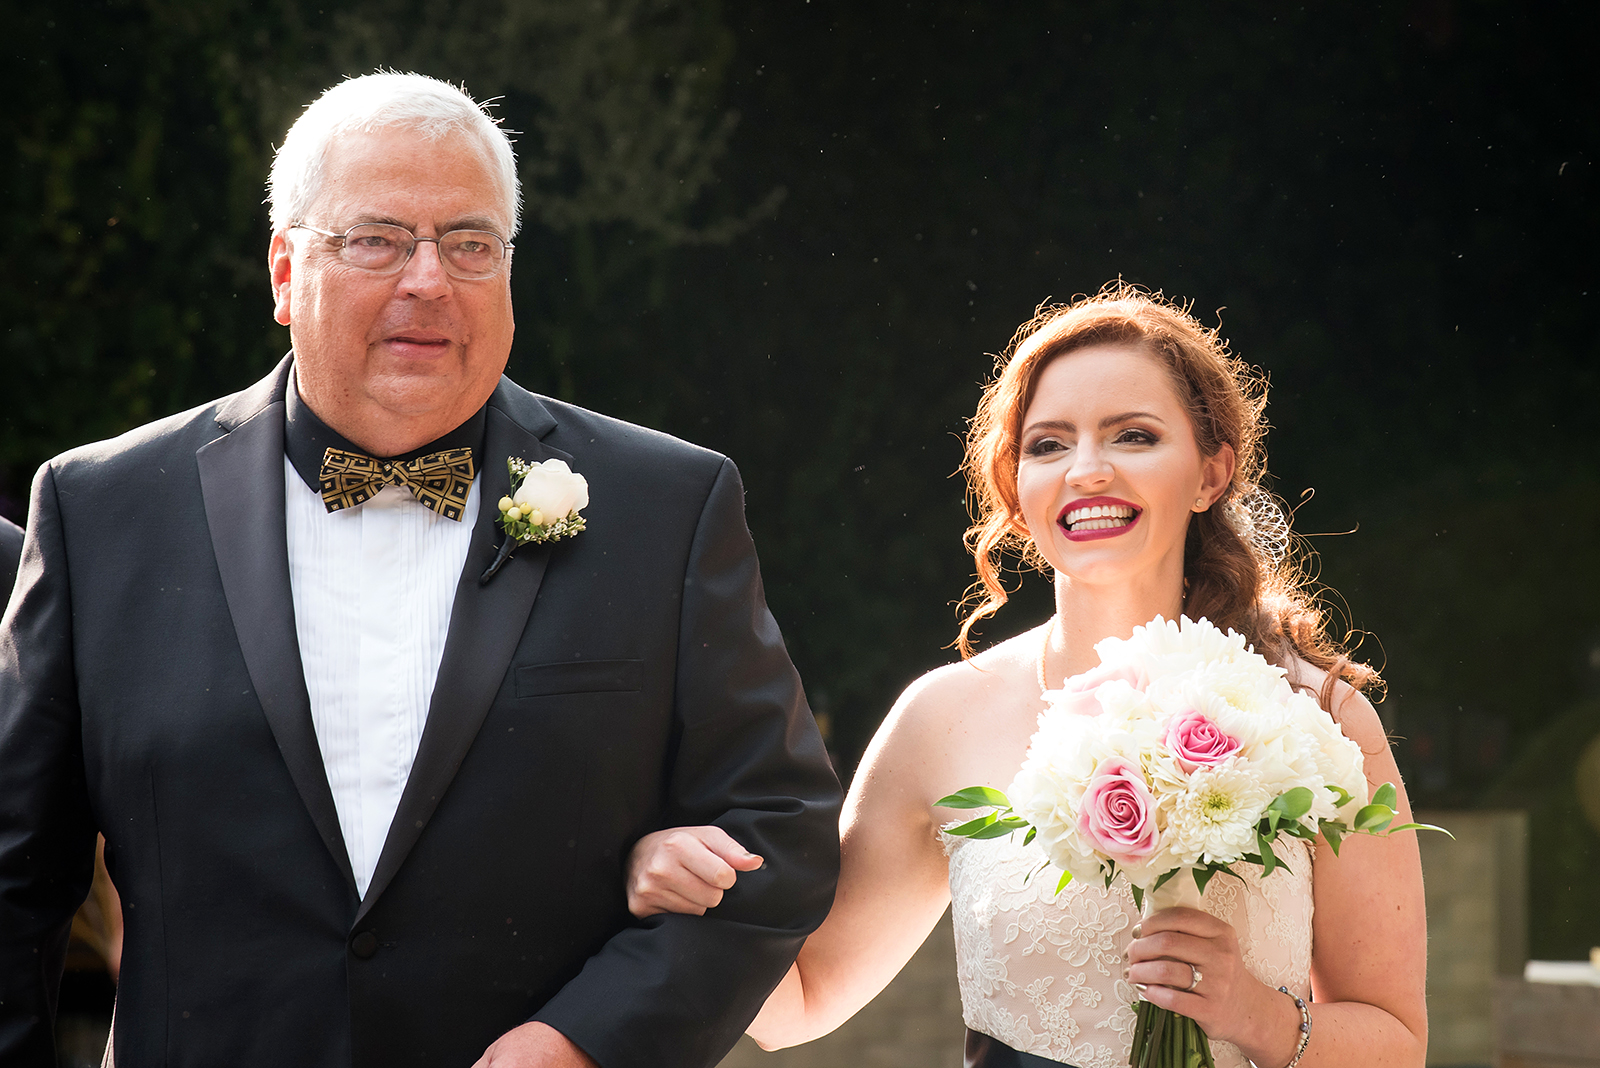 Bride walking down aisle with dad